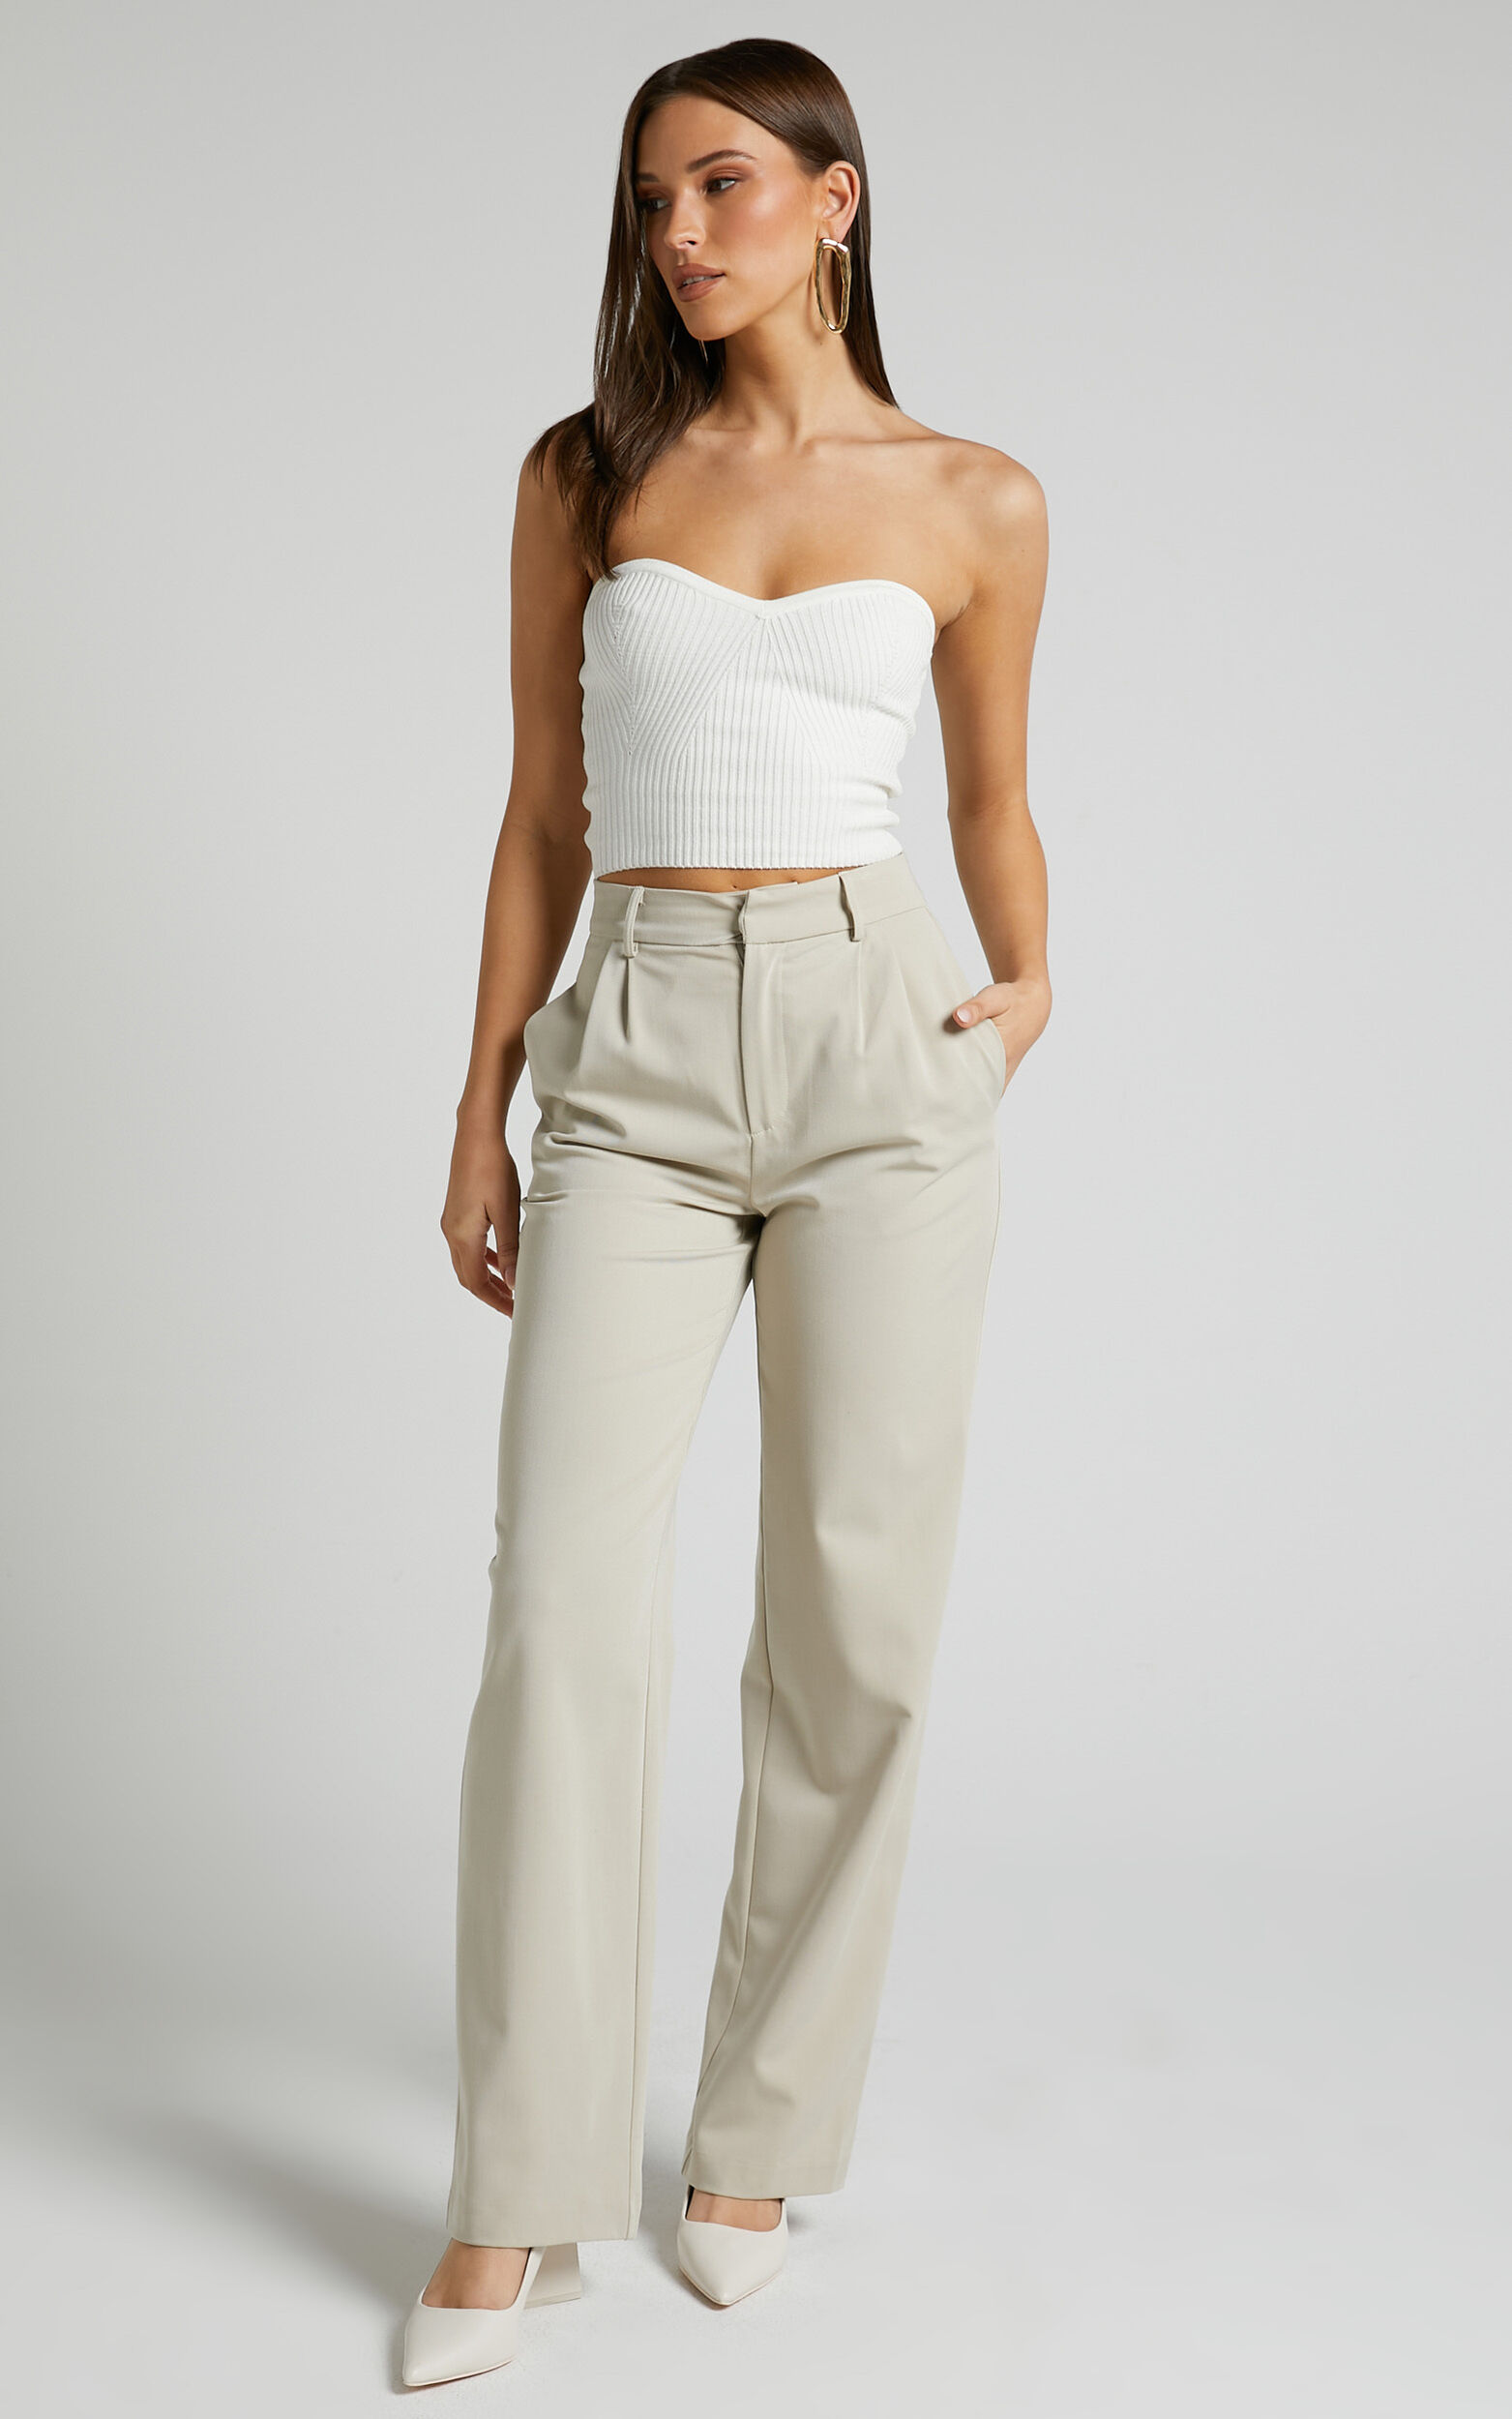 Lorcan Pants - High Waisted Tailored Pants in Stone